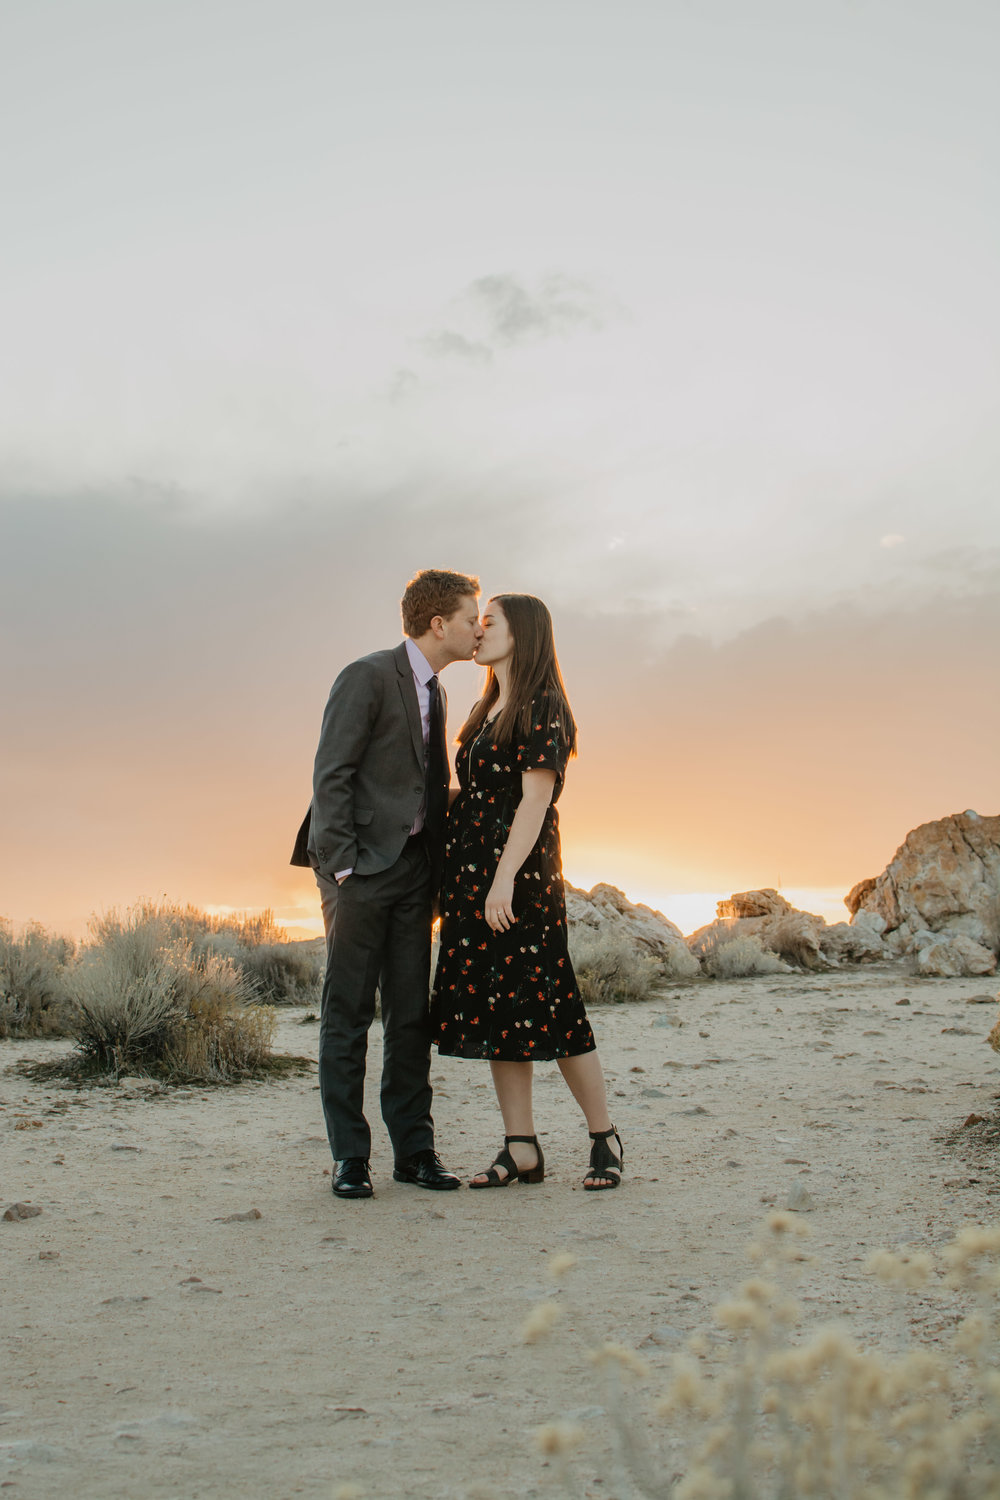 sun setting in Antelope Island for an engagement session with man and woman kissing as the sun sets behind them and the light shines through their hair Jocilyn Bennett Photography | Destination Wedding Photographer | Elopement Wedding Photographer | National Park Elopement Photography | Capturing raw and genuine emotion | Utah Photographer | Utah wedding Photographer | National Park Weddings | Adventure Photographer | Antelope Island Engagements | Engagement pose ideas | Utah engagement photography | Engagement Pose Ideas | Candid Engagements |